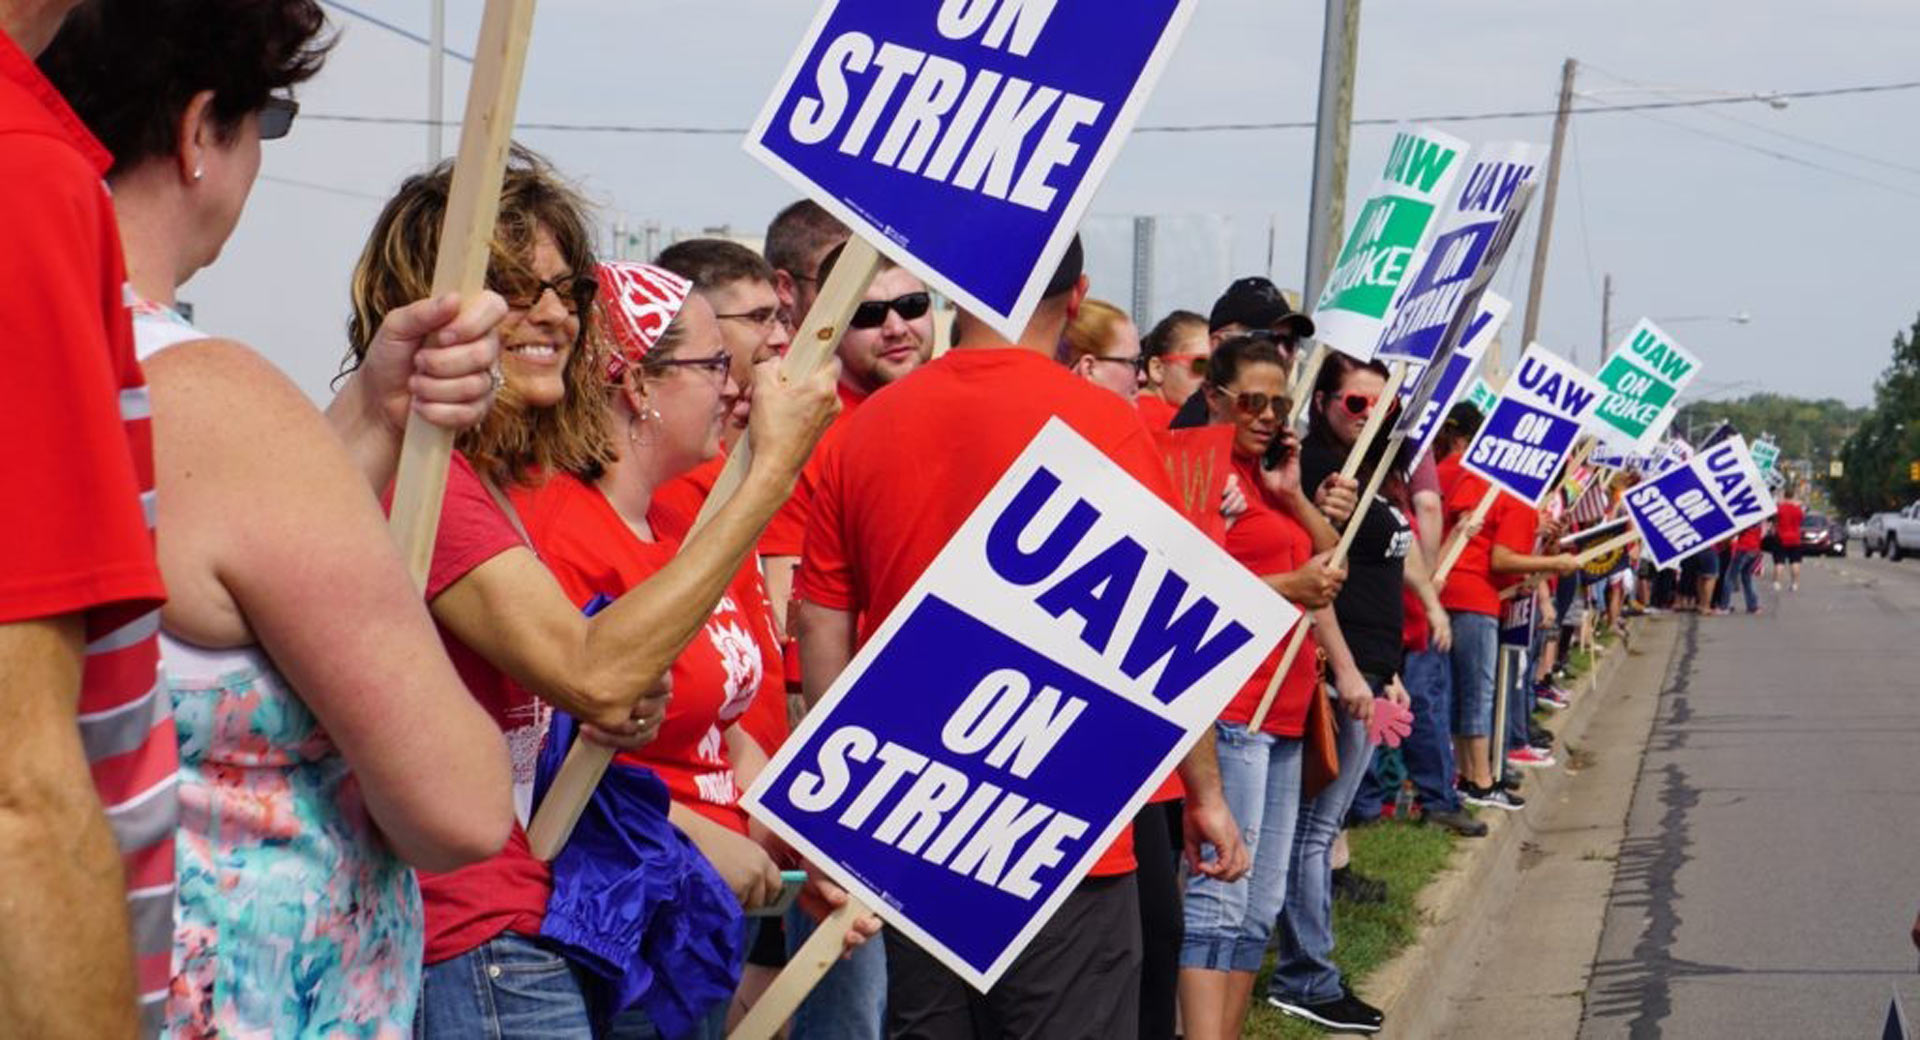 UAW And GM Negotiations Take A “Turn For The Worse” Carscoops